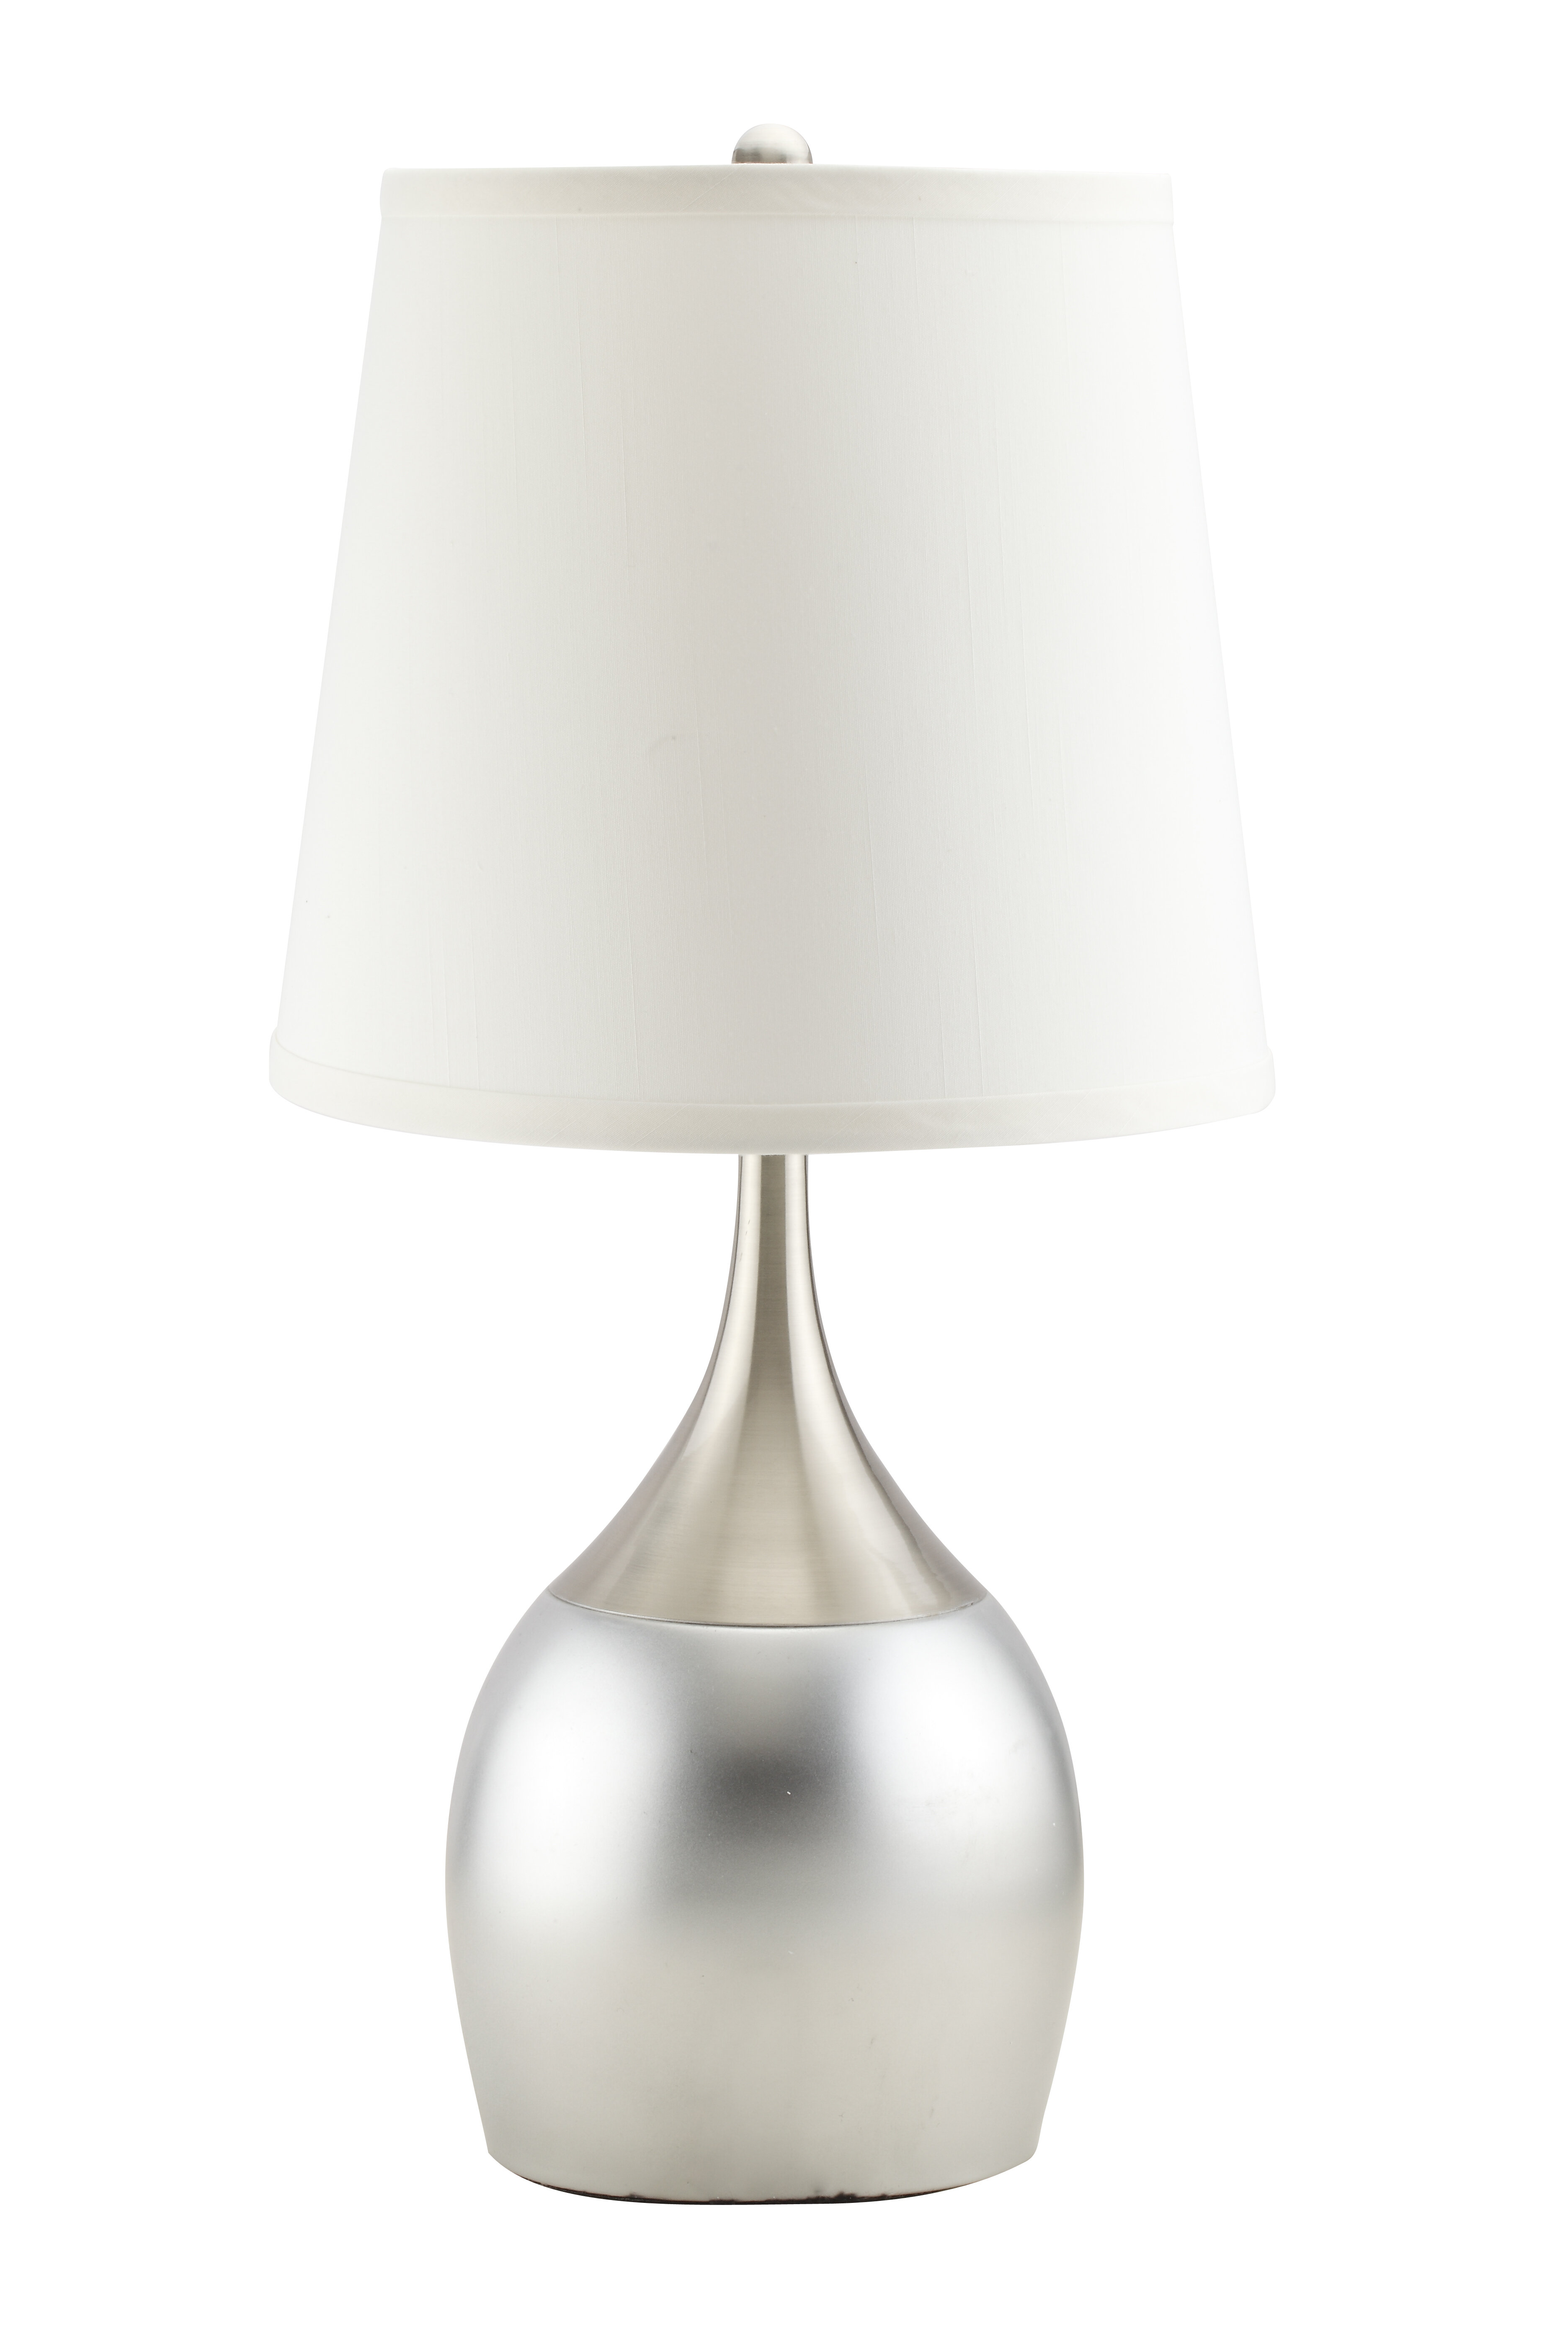 3 way touch table lamps for bedroom